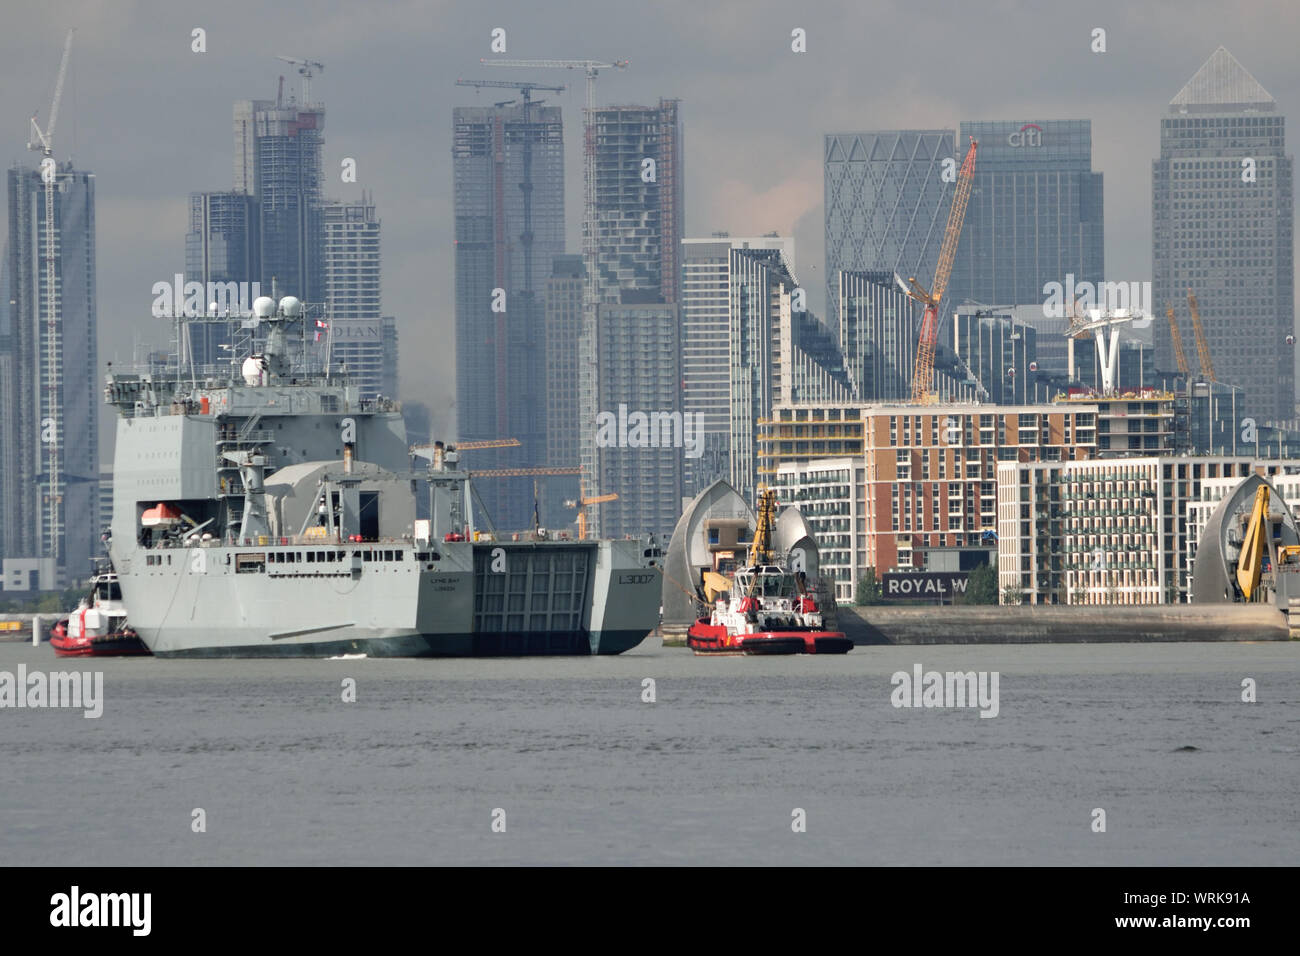 Royal Fleet Auxiliary ship RFA Lyme Bay arriving on the River Thames on a visit London Stock Photo